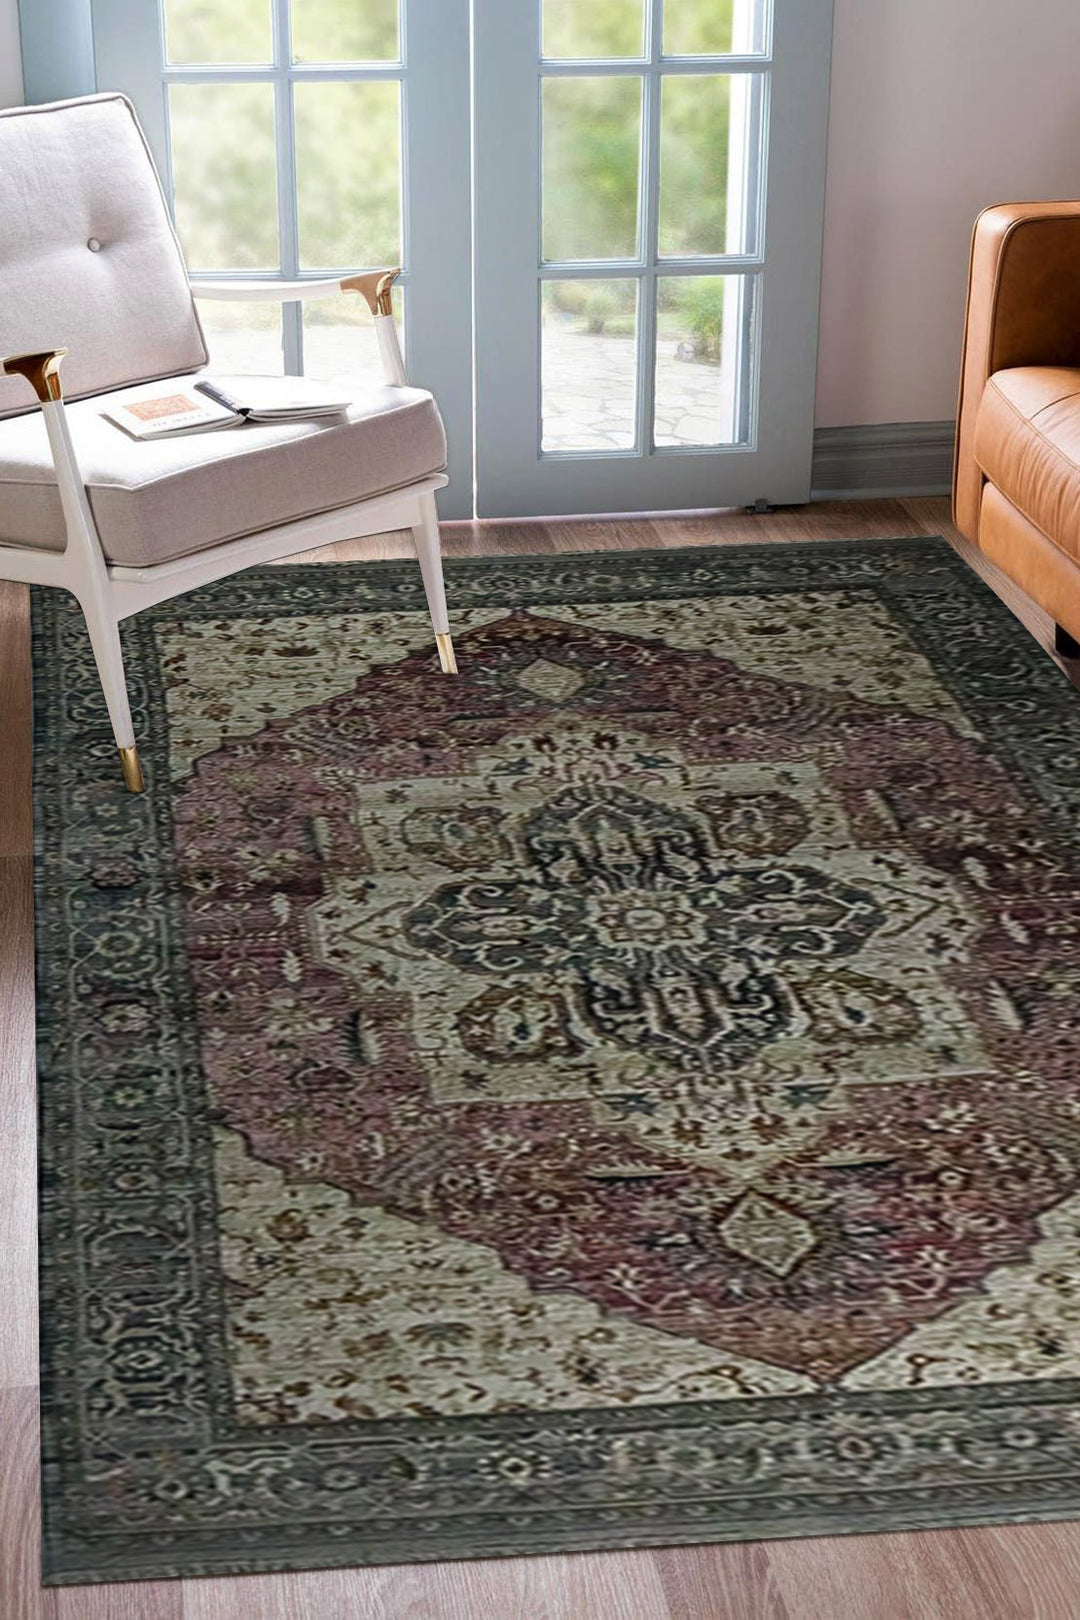 Turkish Modern Festival Plus Rug -  6.56 x 9.84 FT - Cream and Maroon -  Superior Comfort, Modern Style Accent Rugs